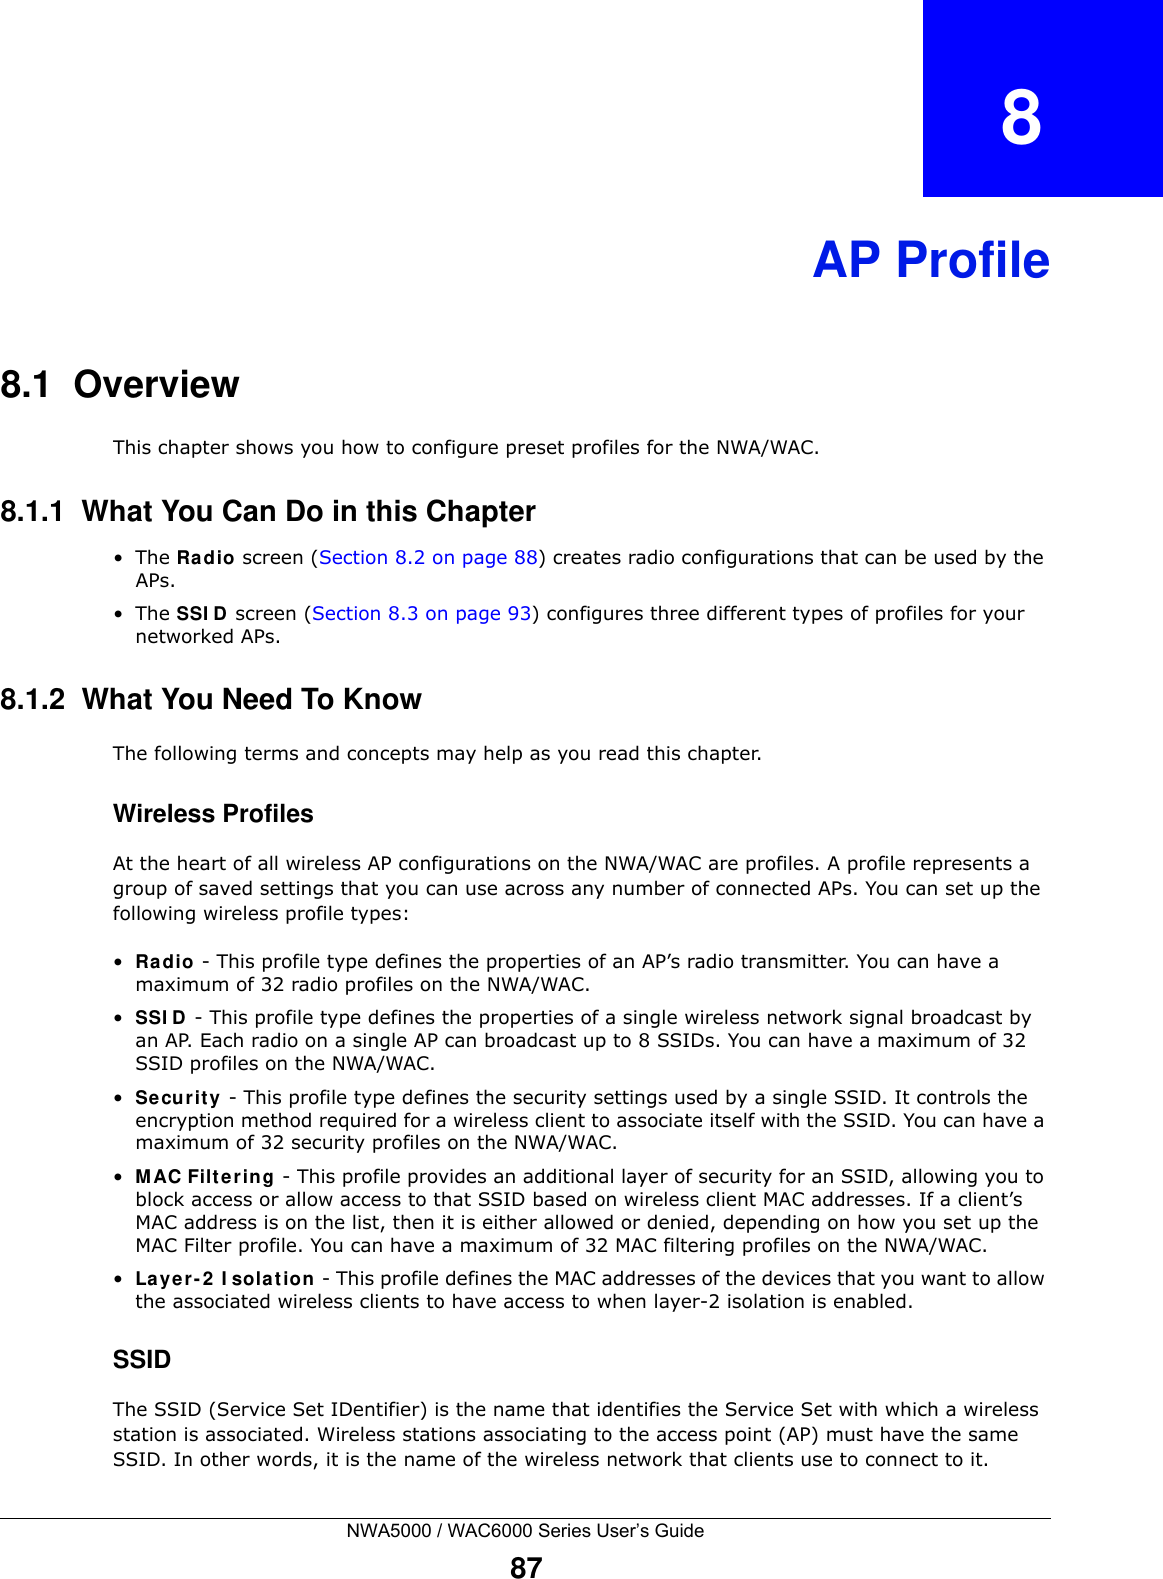 NWA5000 / WAC6000 Series User’s Guide87CHAPTER   8AP Profile8.1  OverviewThis chapter shows you how to configure preset profiles for the NWA/WAC. 8.1.1  What You Can Do in this Chapter•The Radio screen (Section 8.2 on page 88) creates radio configurations that can be used by the APs.•The SSID screen (Section 8.3 on page 93) configures three different types of profiles for your networked APs.8.1.2  What You Need To KnowThe following terms and concepts may help as you read this chapter.Wireless ProfilesAt the heart of all wireless AP configurations on the NWA/WAC are profiles. A profile represents a group of saved settings that you can use across any number of connected APs. You can set up the following wireless profile types:•Radio - This profile type defines the properties of an AP’s radio transmitter. You can have a maximum of 32 radio profiles on the NWA/WAC.•SSID - This profile type defines the properties of a single wireless network signal broadcast by an AP. Each radio on a single AP can broadcast up to 8 SSIDs. You can have a maximum of 32 SSID profiles on the NWA/WAC.•Security - This profile type defines the security settings used by a single SSID. It controls the encryption method required for a wireless client to associate itself with the SSID. You can have a maximum of 32 security profiles on the NWA/WAC.•MAC Filtering - This profile provides an additional layer of security for an SSID, allowing you to block access or allow access to that SSID based on wireless client MAC addresses. If a client’s MAC address is on the list, then it is either allowed or denied, depending on how you set up the MAC Filter profile. You can have a maximum of 32 MAC filtering profiles on the NWA/WAC.•Layer-2 Isolation - This profile defines the MAC addresses of the devices that you want to allow the associated wireless clients to have access to when layer-2 isolation is enabled. SSIDThe SSID (Service Set IDentifier) is the name that identifies the Service Set with which a wireless station is associated. Wireless stations associating to the access point (AP) must have the same SSID. In other words, it is the name of the wireless network that clients use to connect to it.